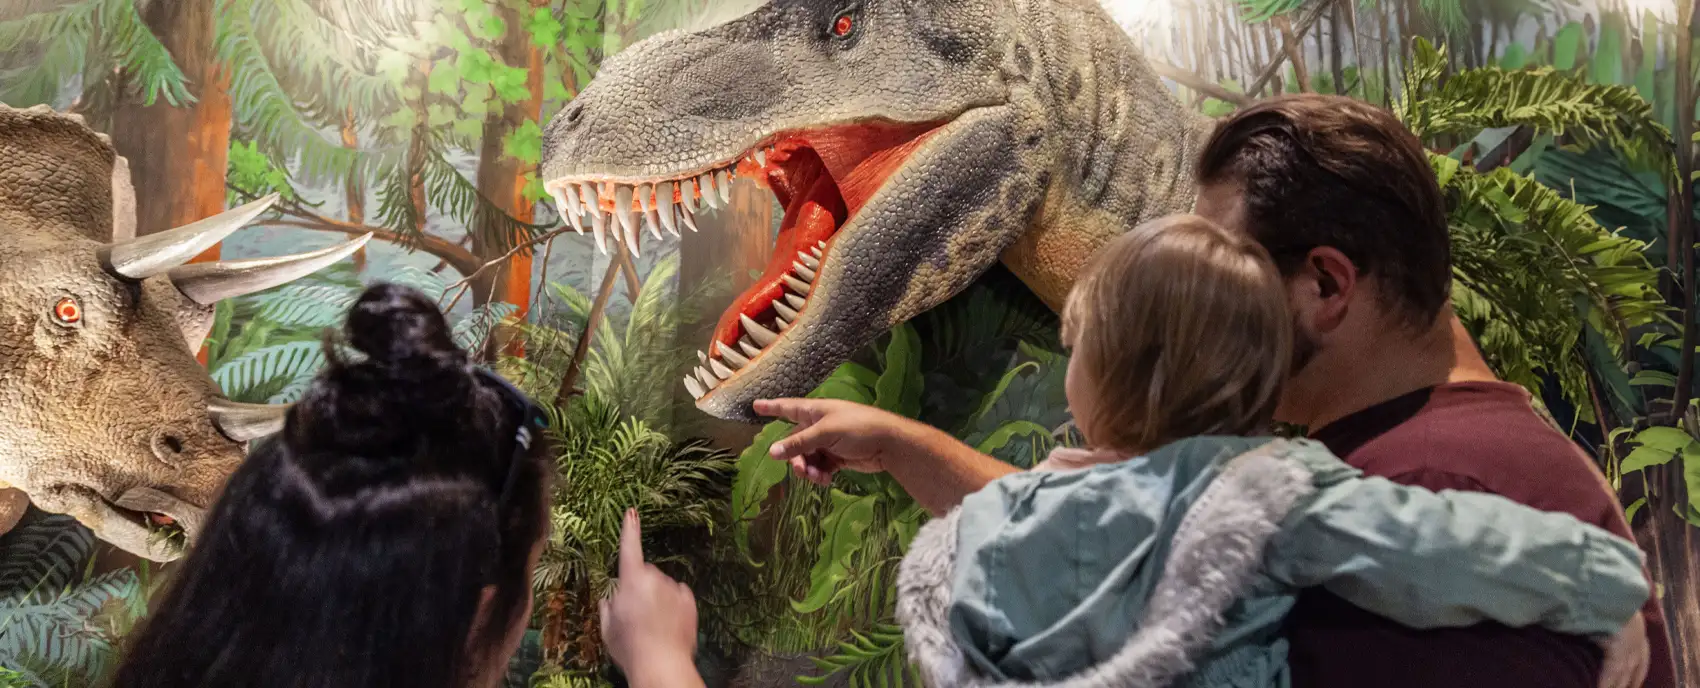 husband and wife holding young child in arms looking at dinosaur